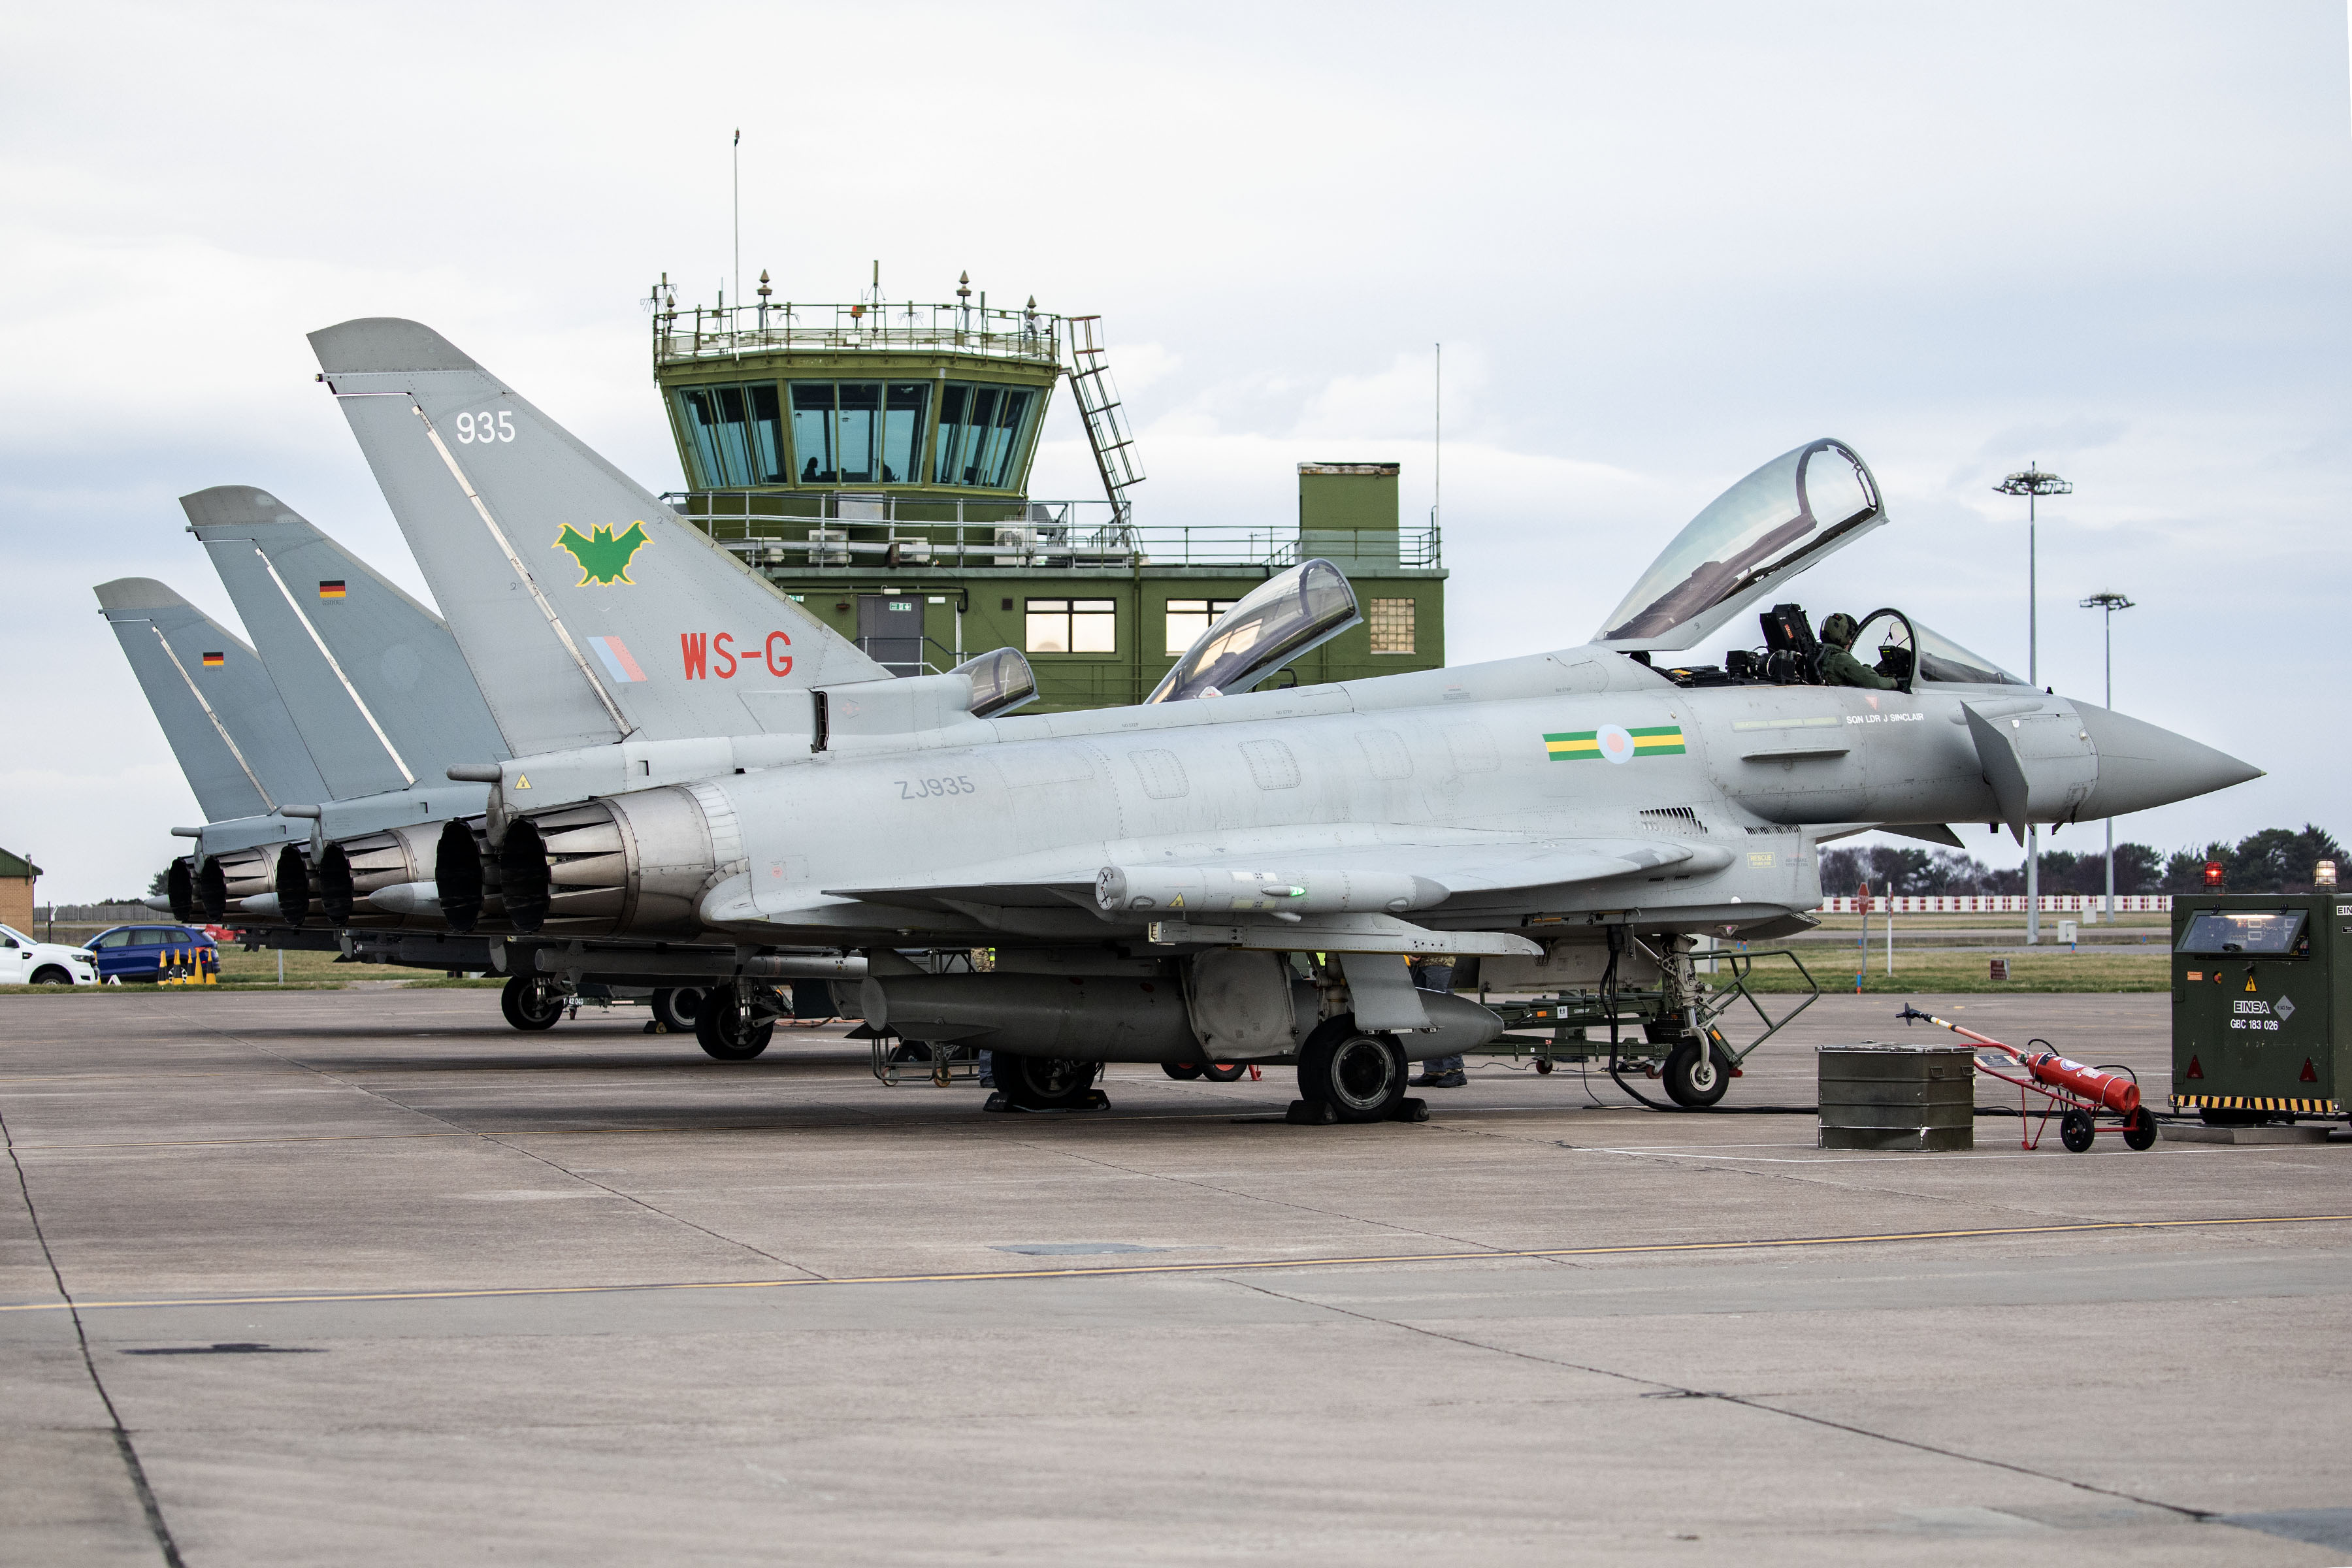 Image shows Typhoons on the airfield.